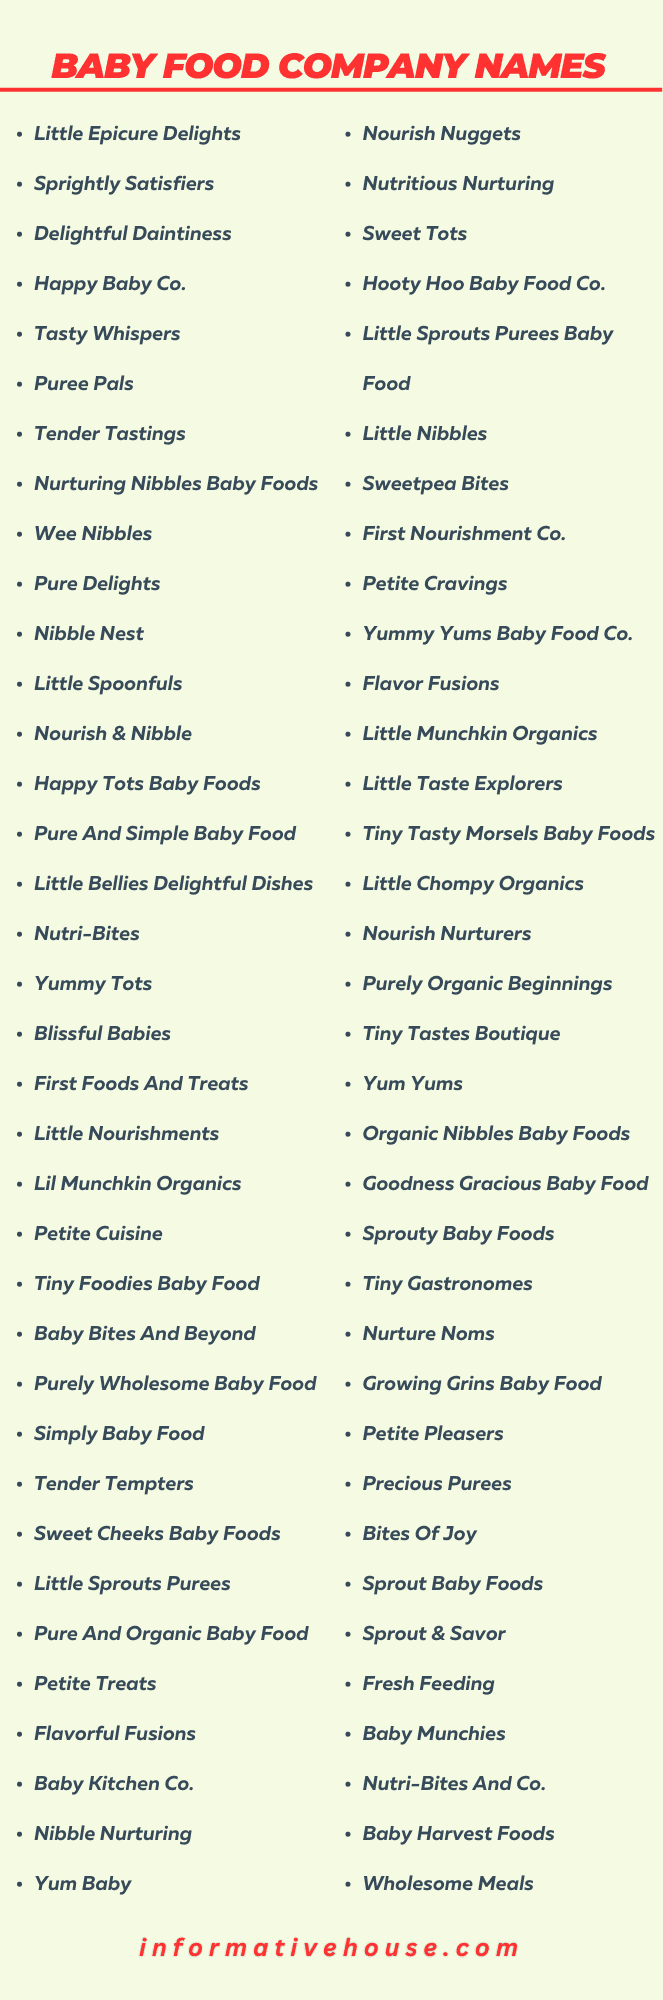 Best Baby Food Company Names